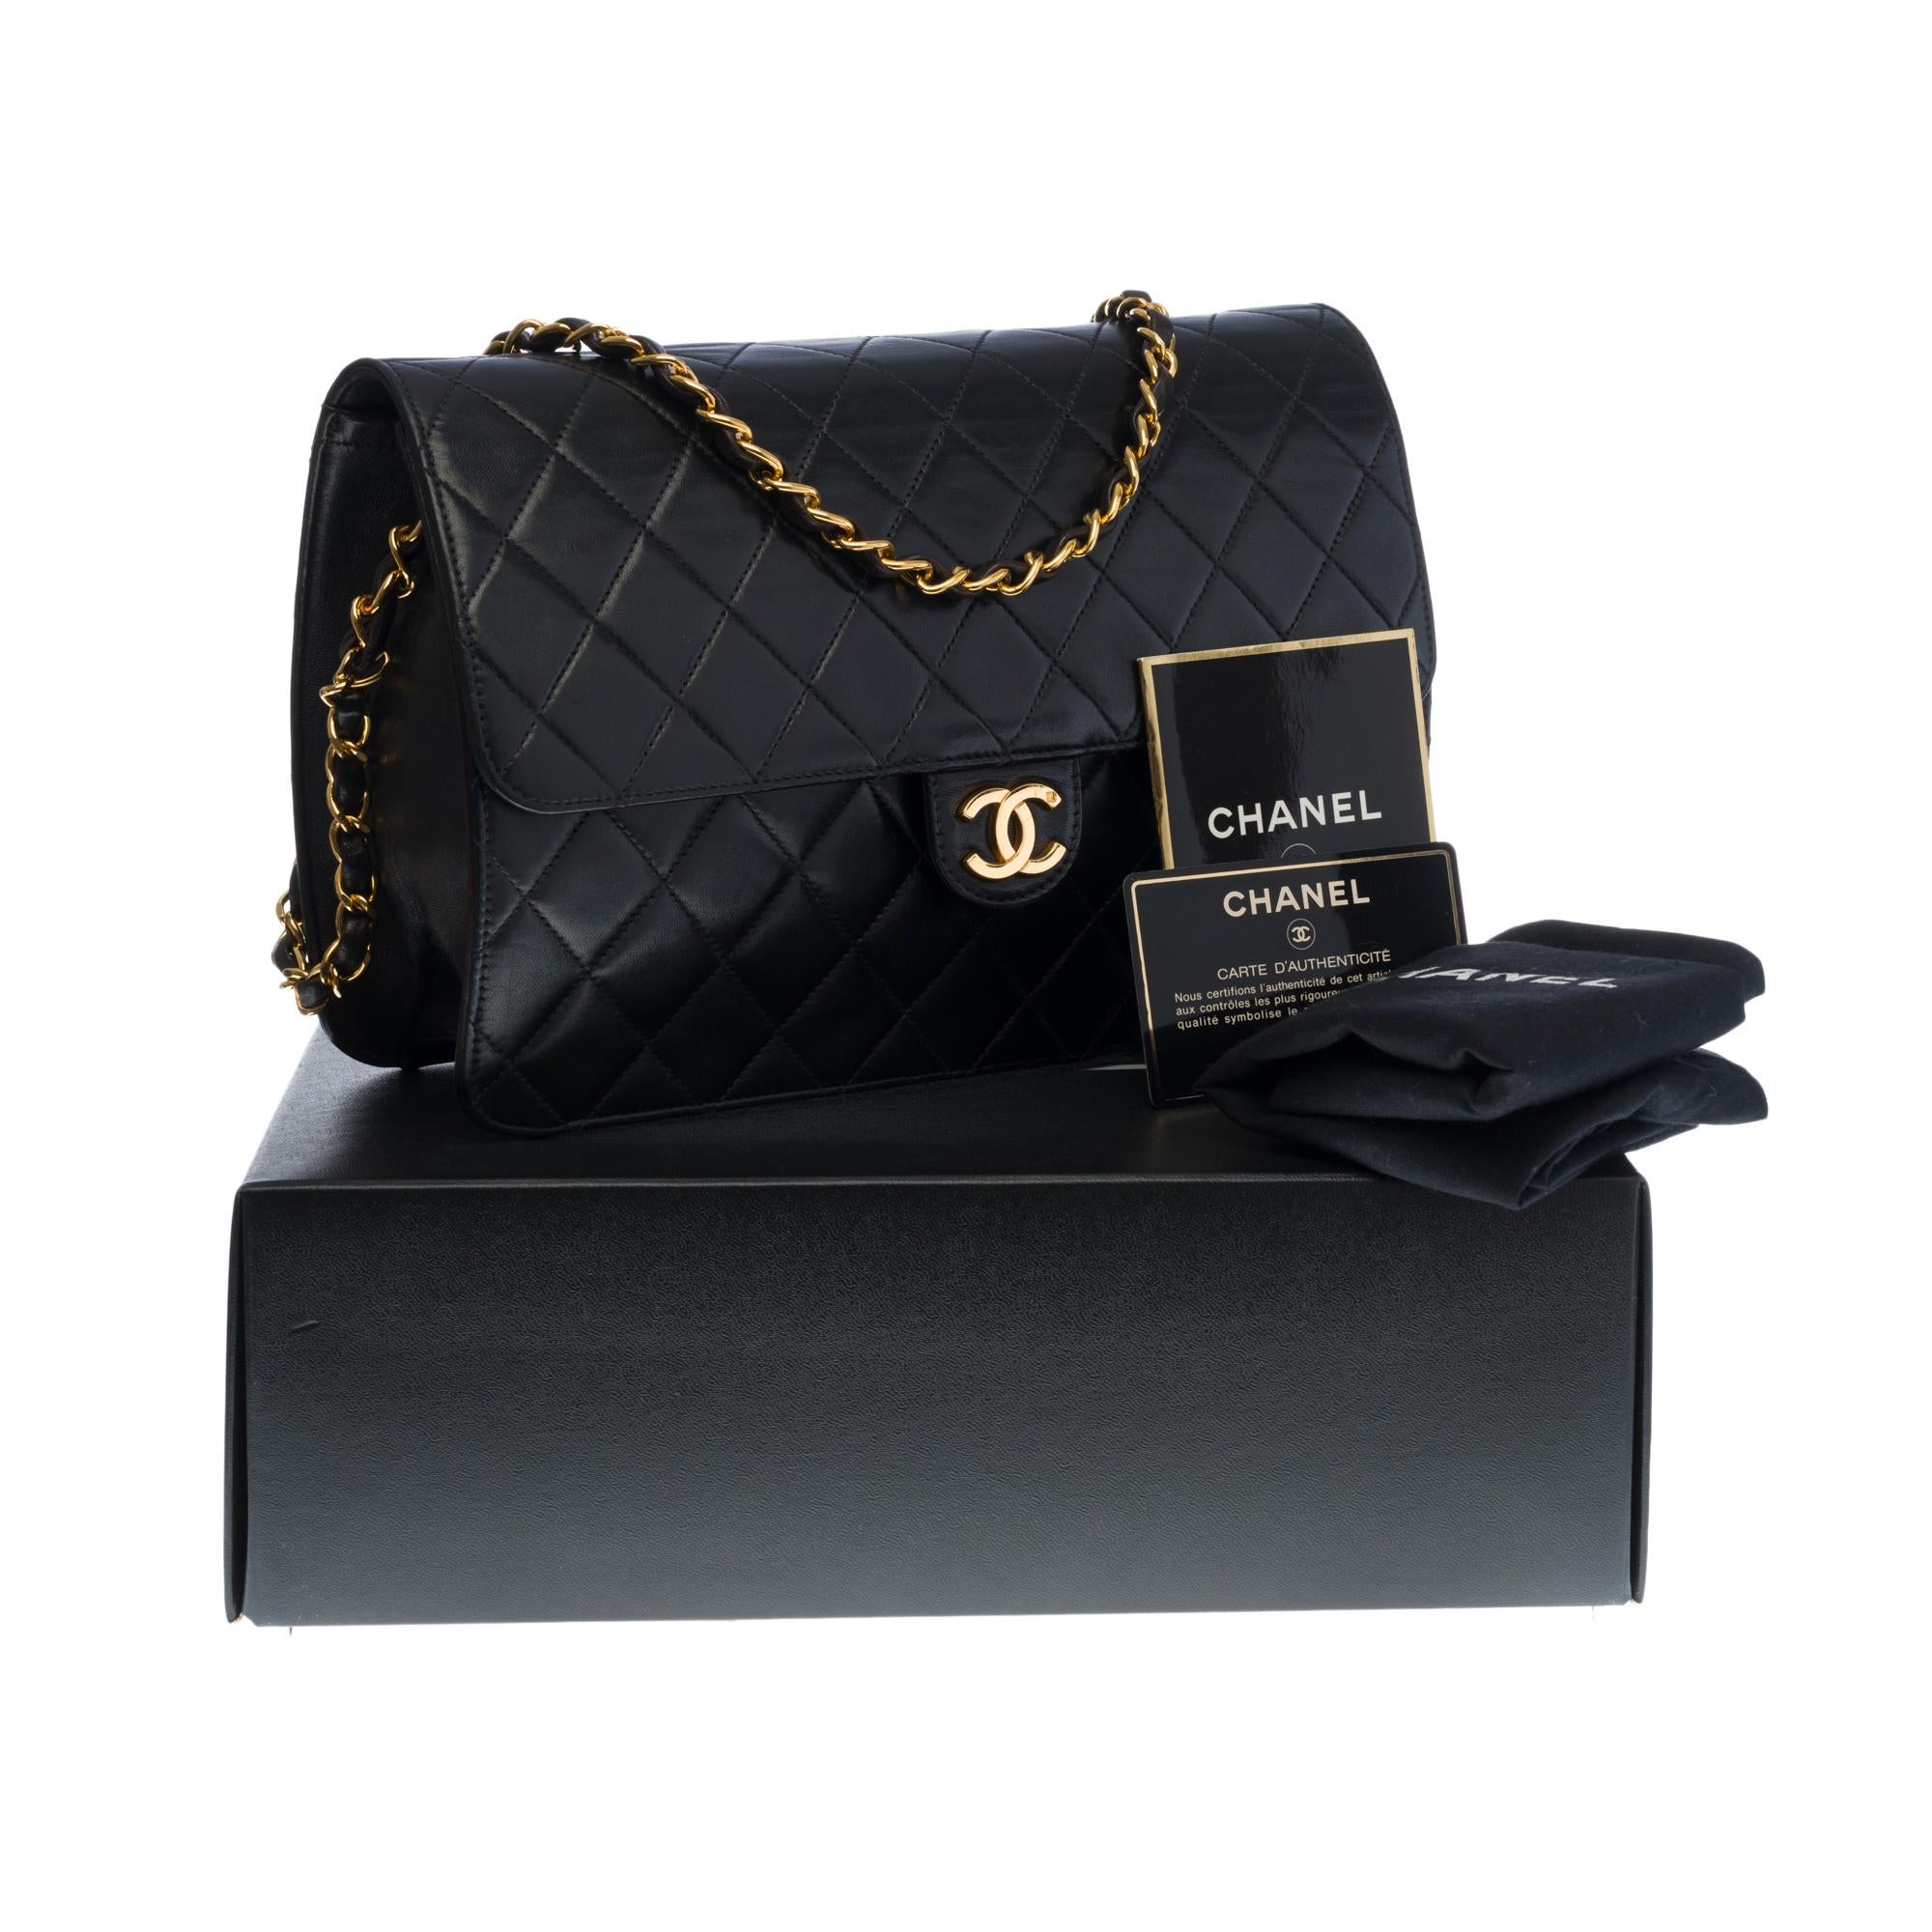 Chanel Classic shoulder Flap bag in black quilted lambskin and gold hardware